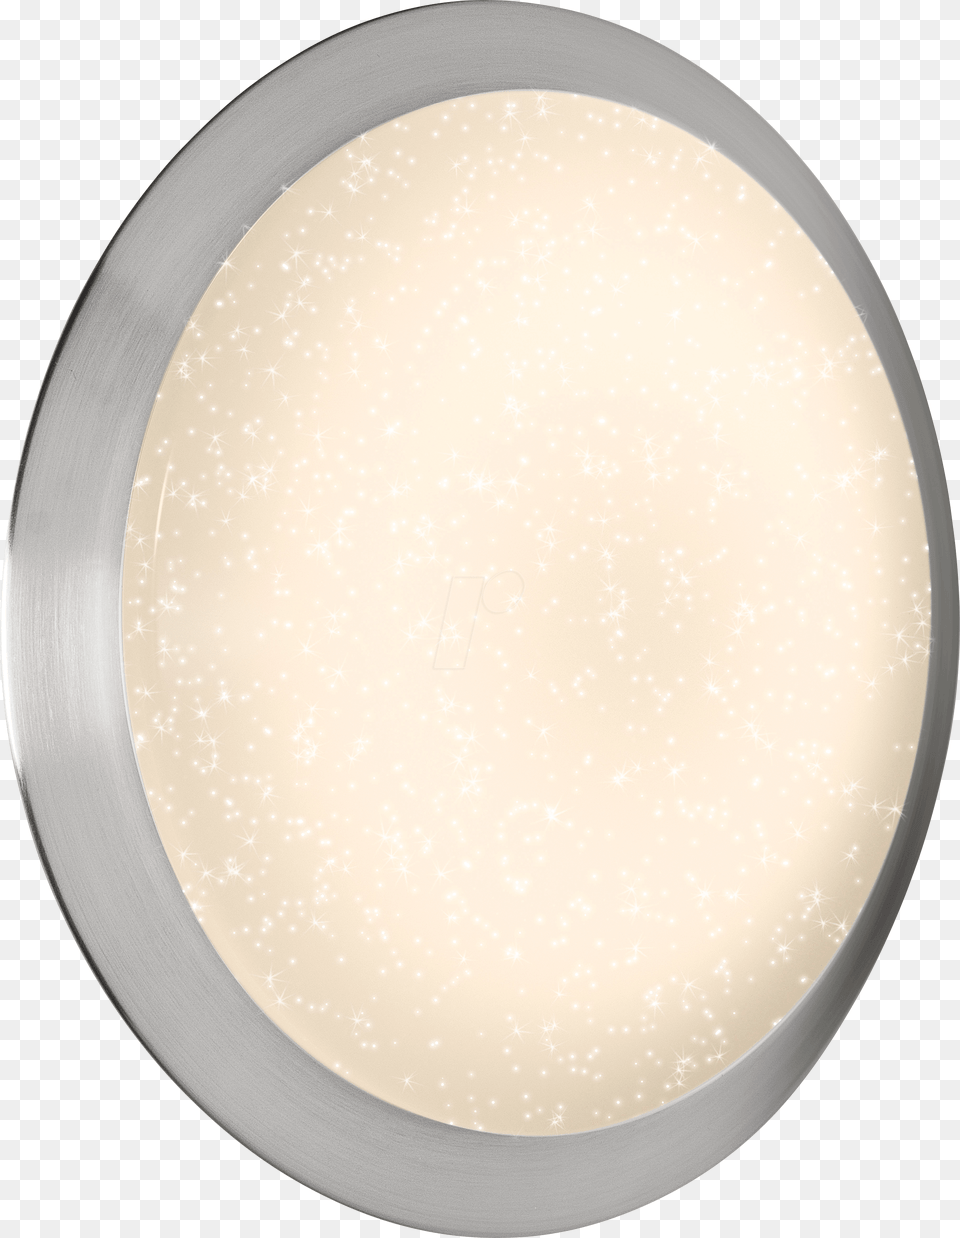 Ceiling Light Silara Tray Sparkle 24 W 1350 Lm Circle, Plate, Food, Meal, Dish Png Image